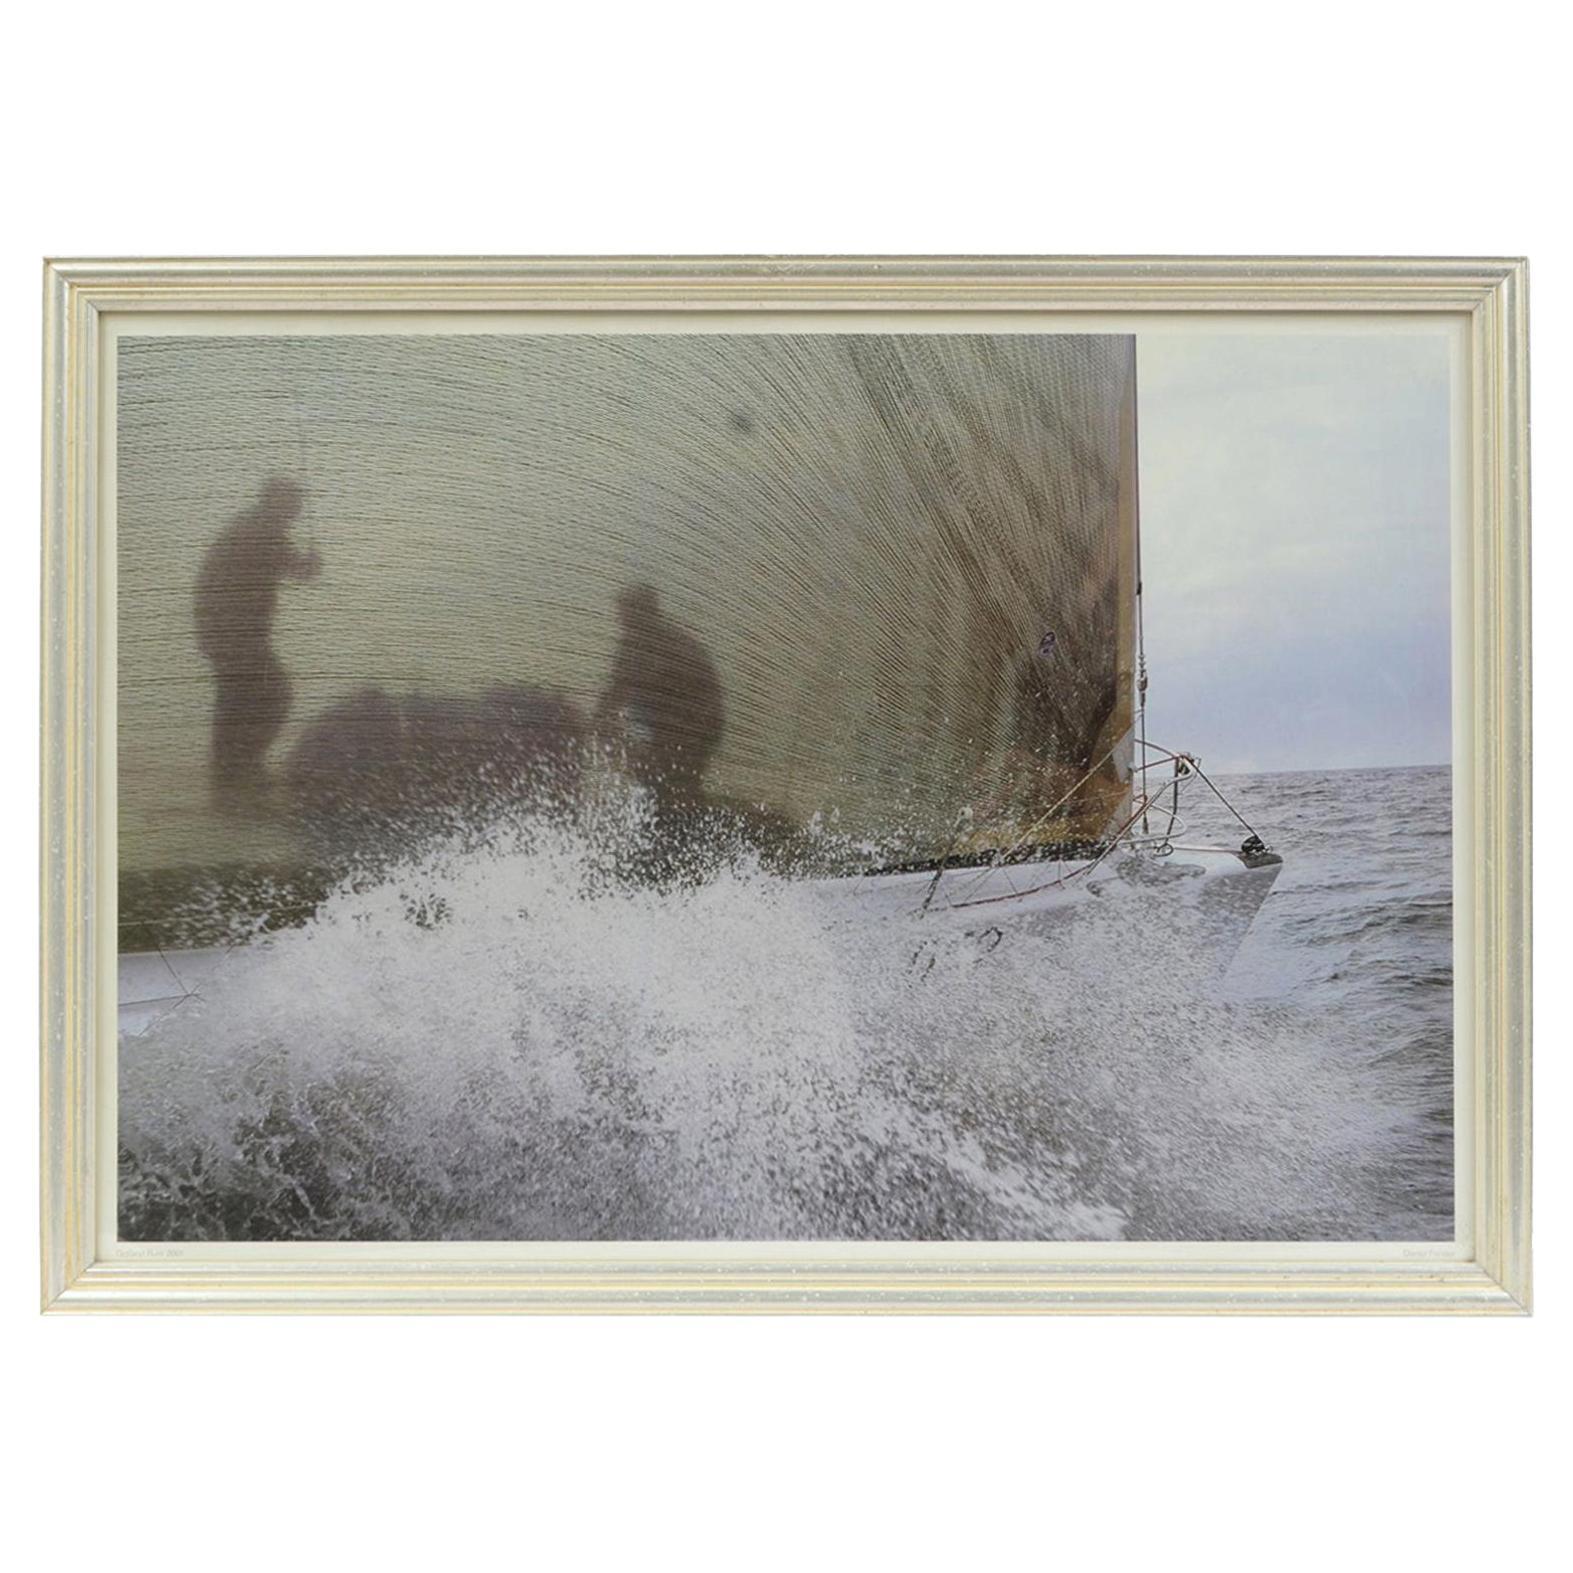 2001 Lithograph of a Racing Ship of a Photo by Daniel Forster Gotlant Rant For Sale